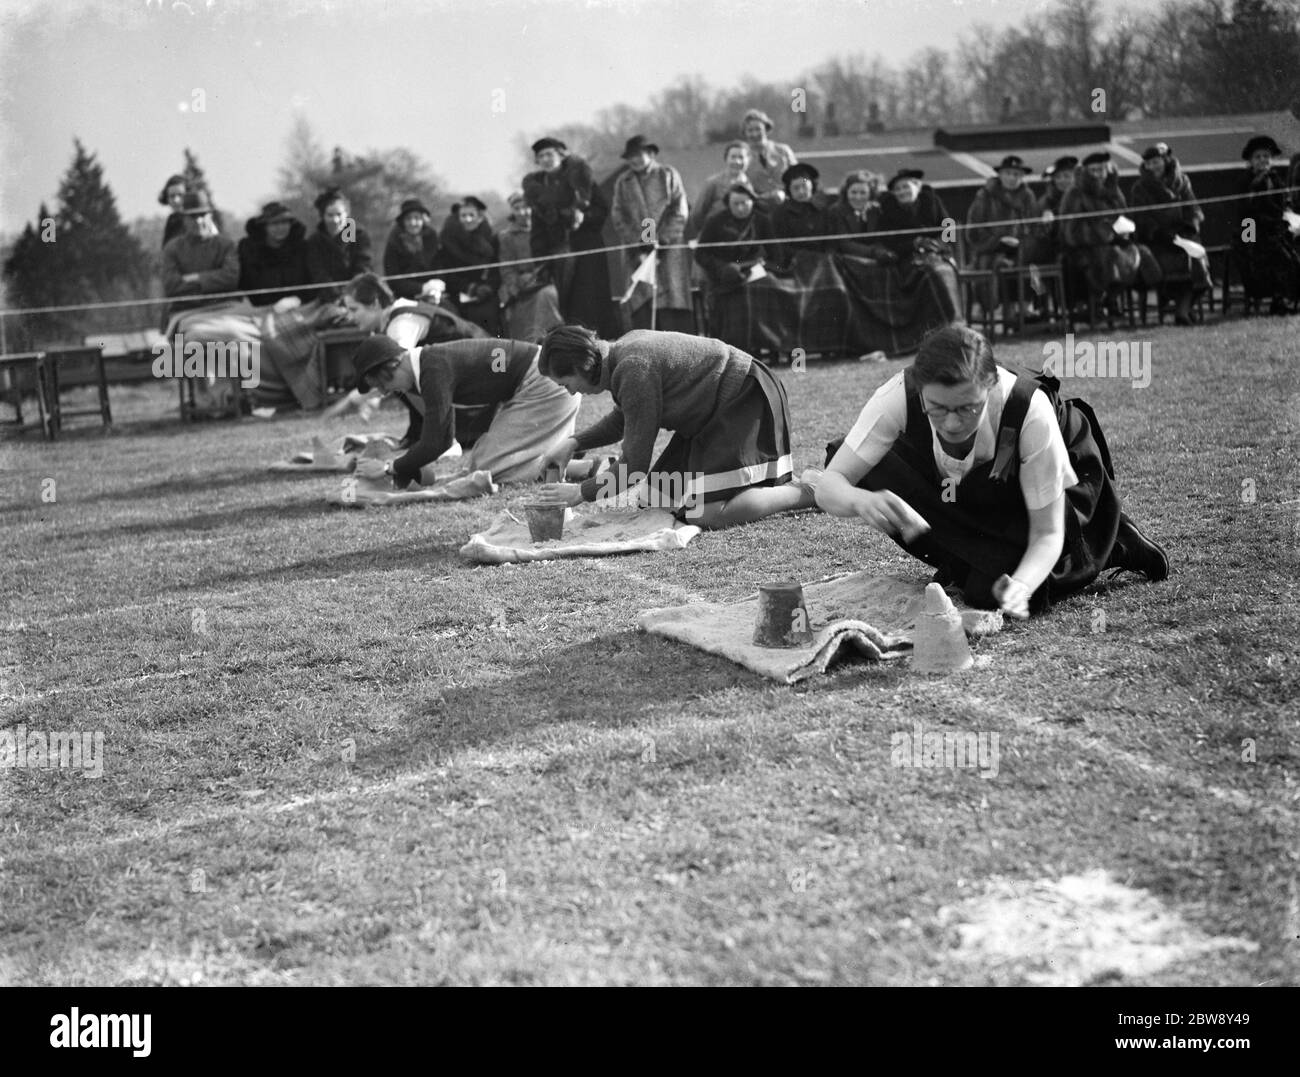 Swanley Horticultural College Sports , course d'obstacles . 1938 Banque D'Images